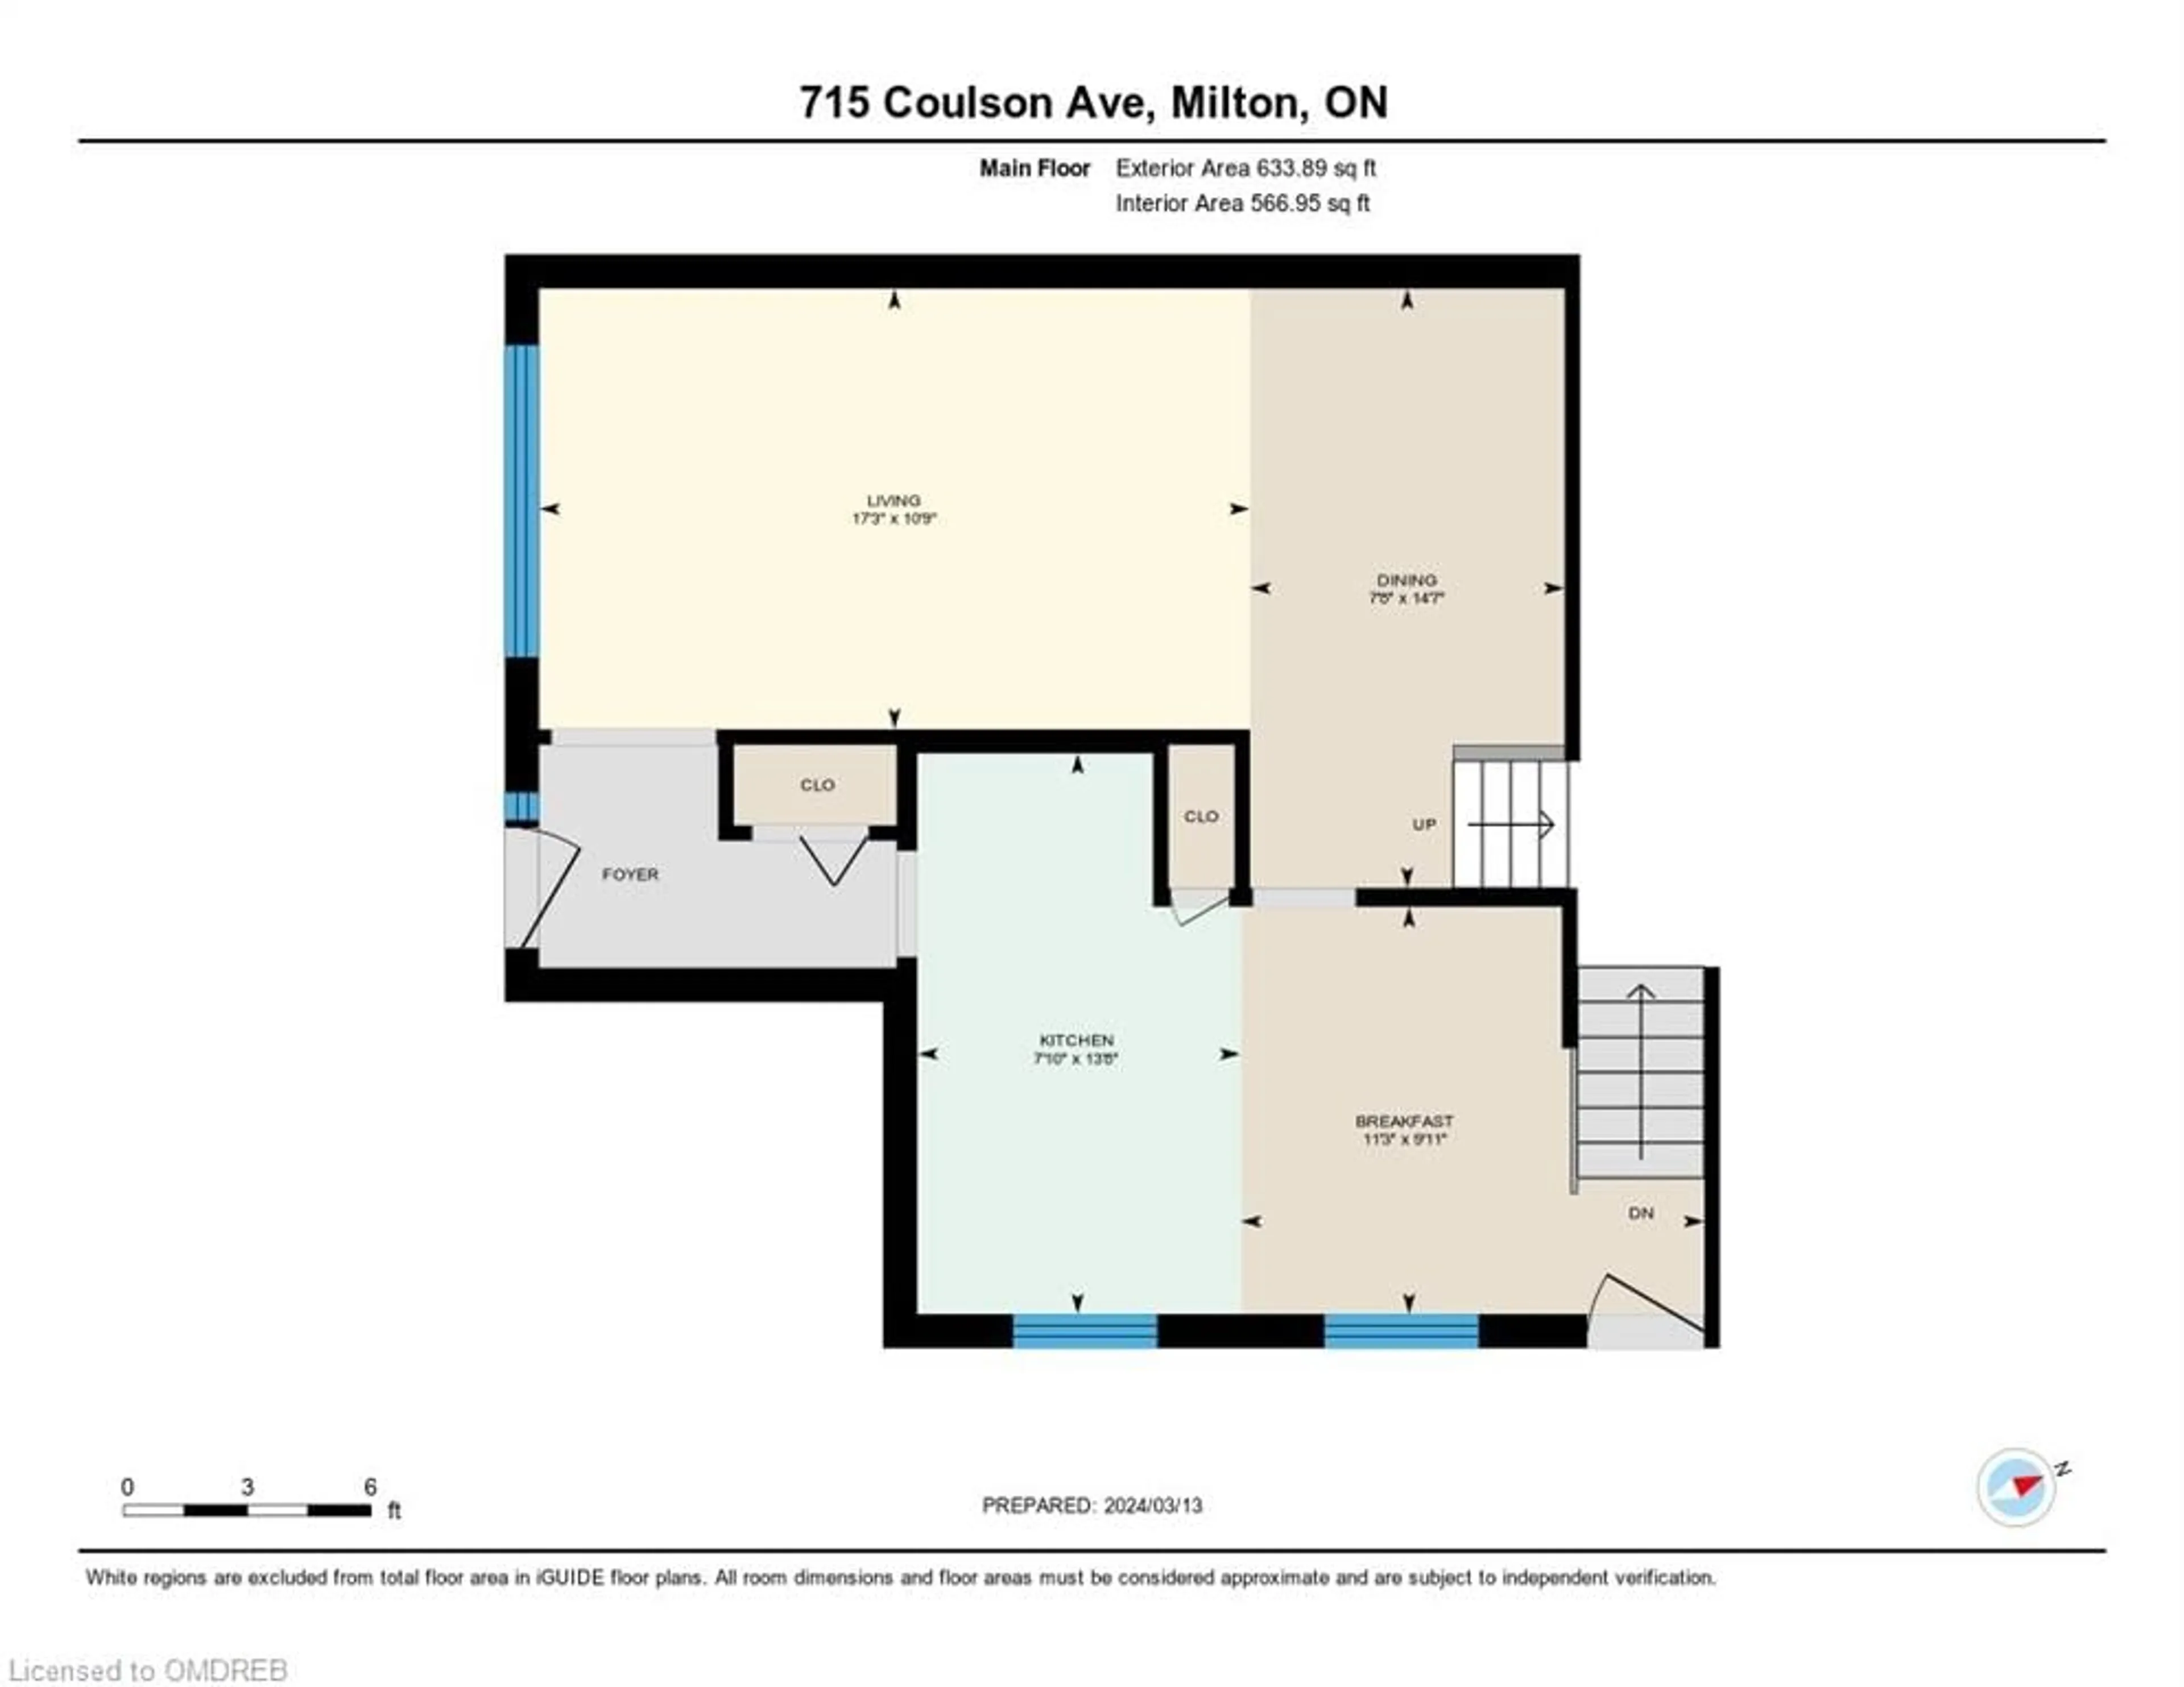 Floor plan for 715 Coulson Ave, Milton Ontario L9T 4J3